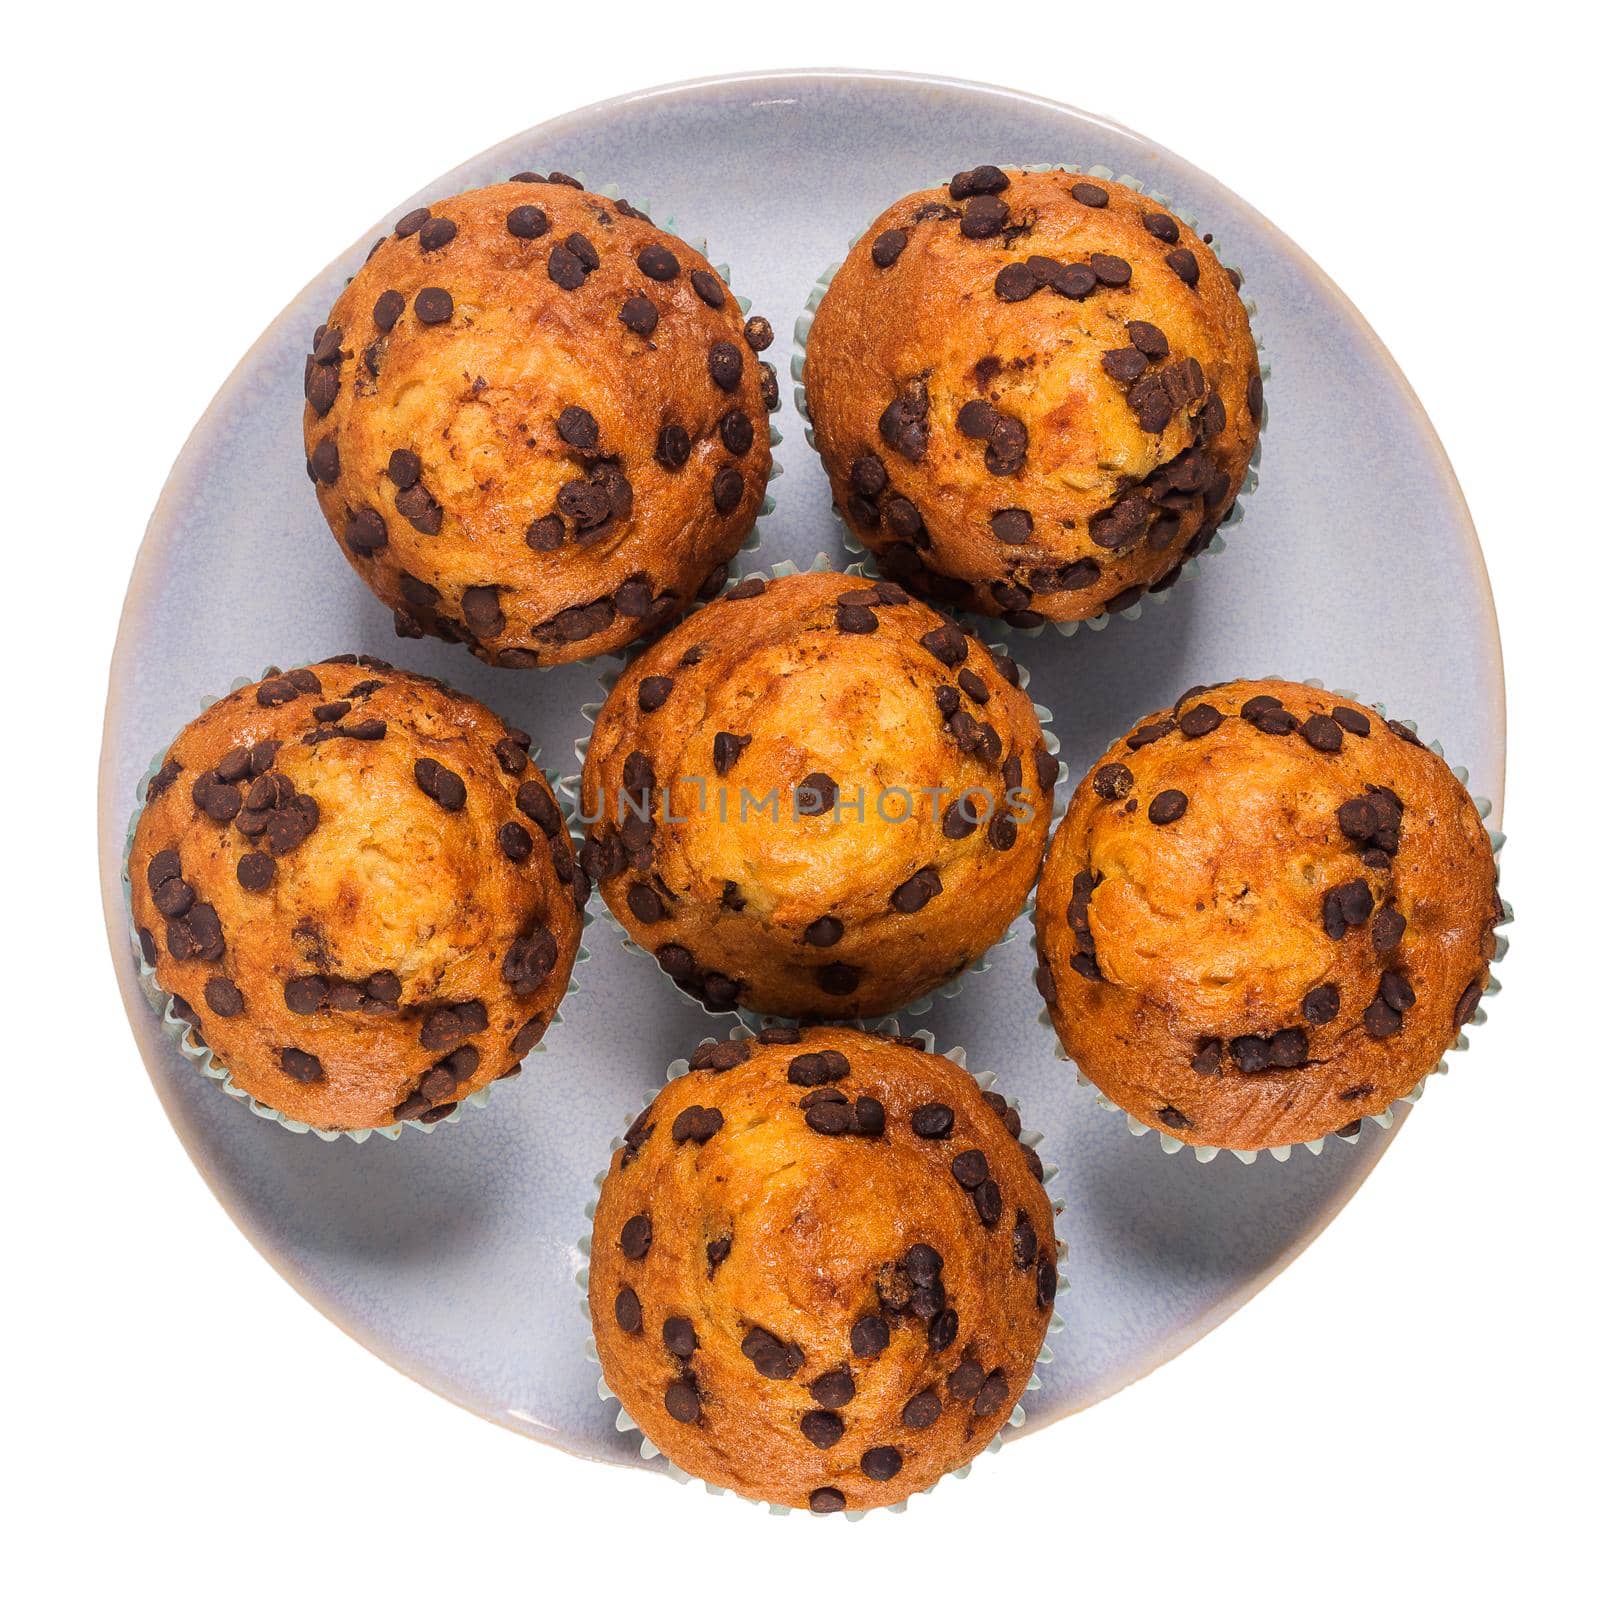 Muffins with chocolate chips on a ceramic plate by homydesign